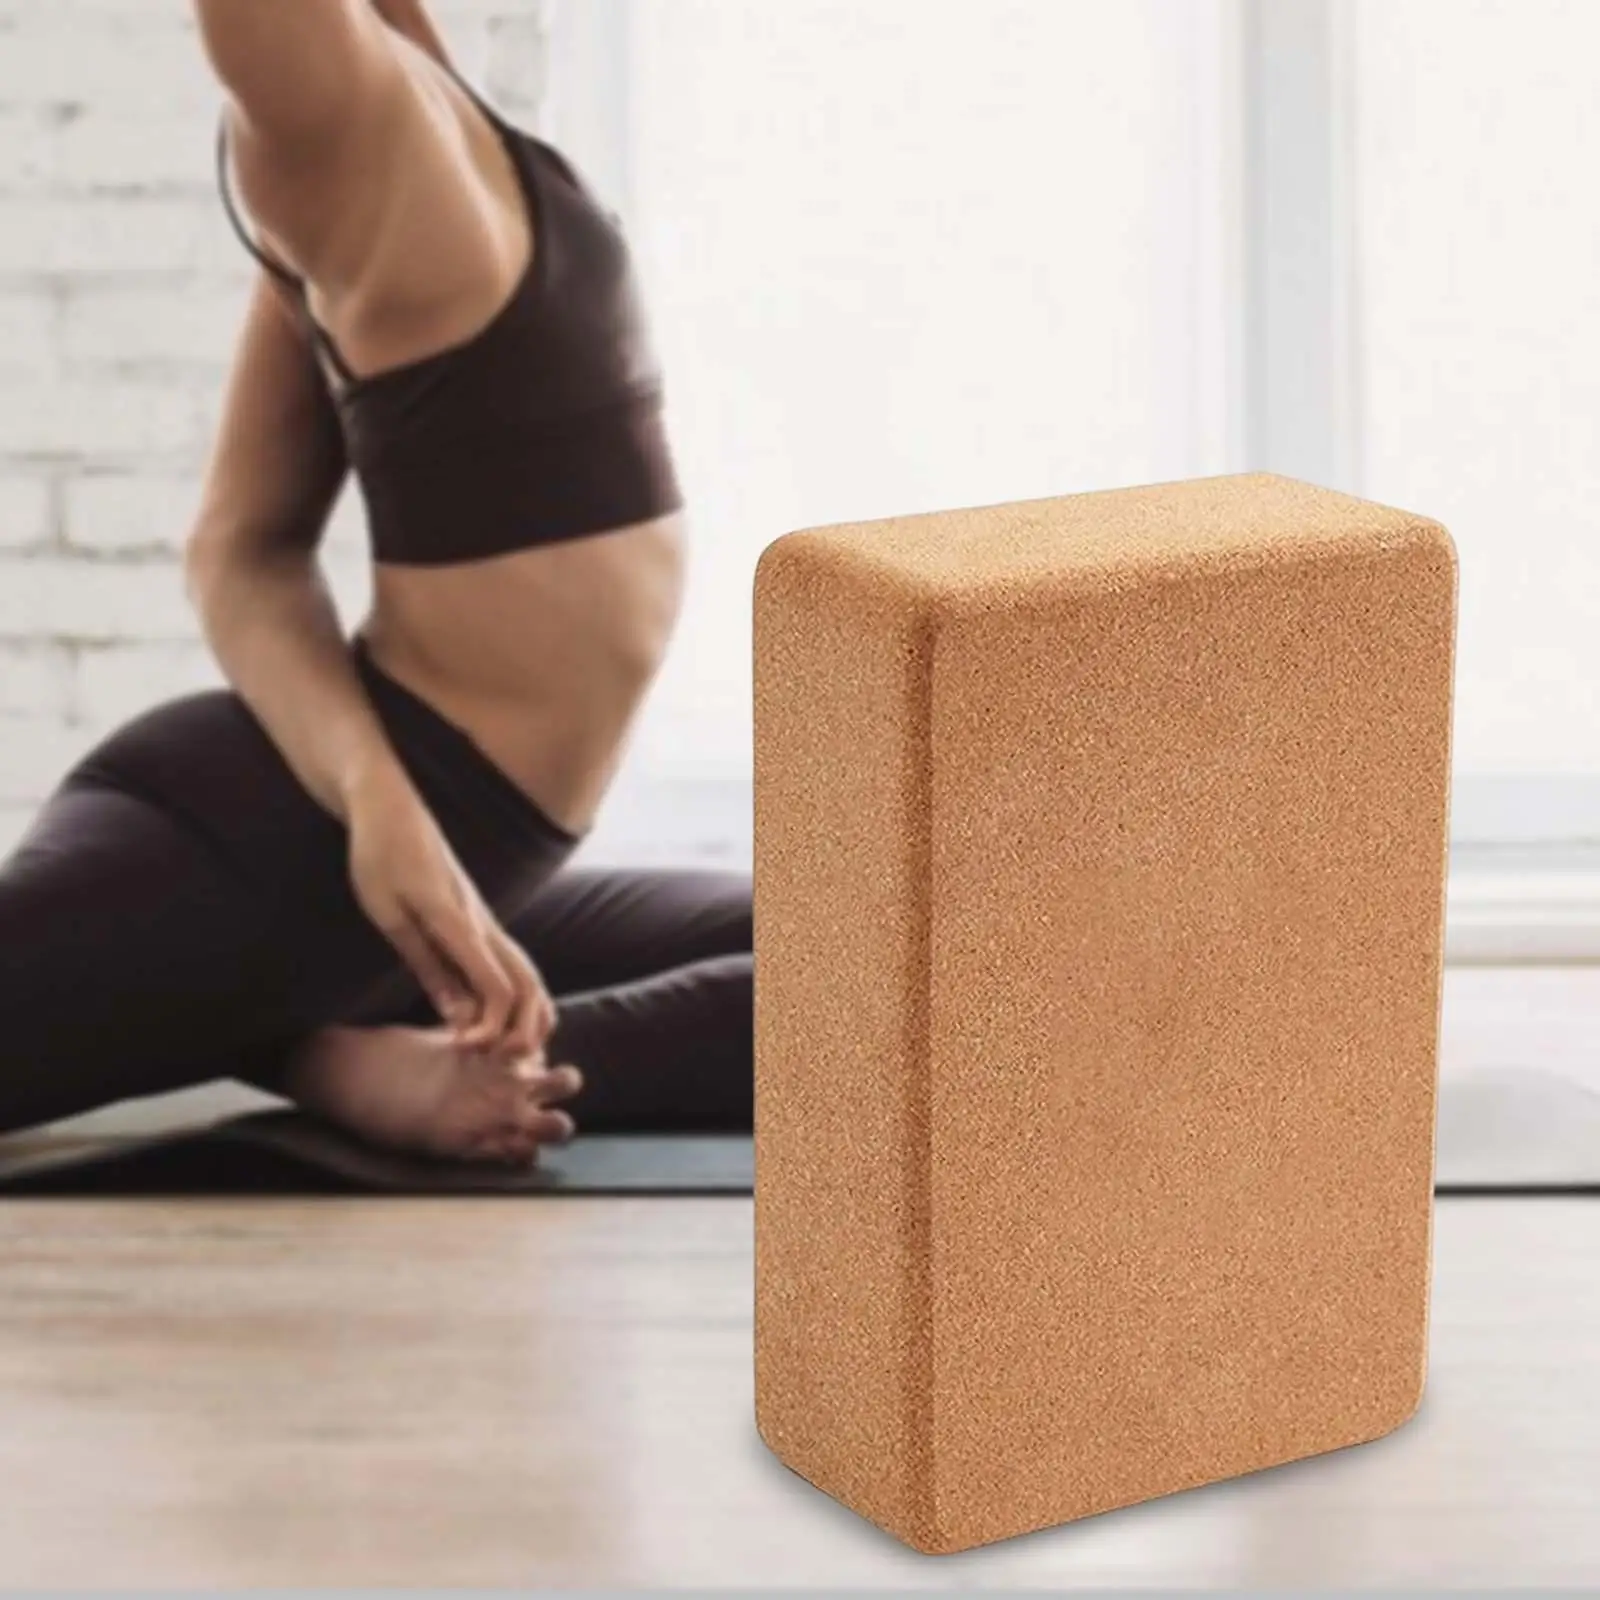 Cork Yoga Block Single Block Body Building High Density Non Slip Supportive Soft for Stretching Fitness Workout Indoor Sports